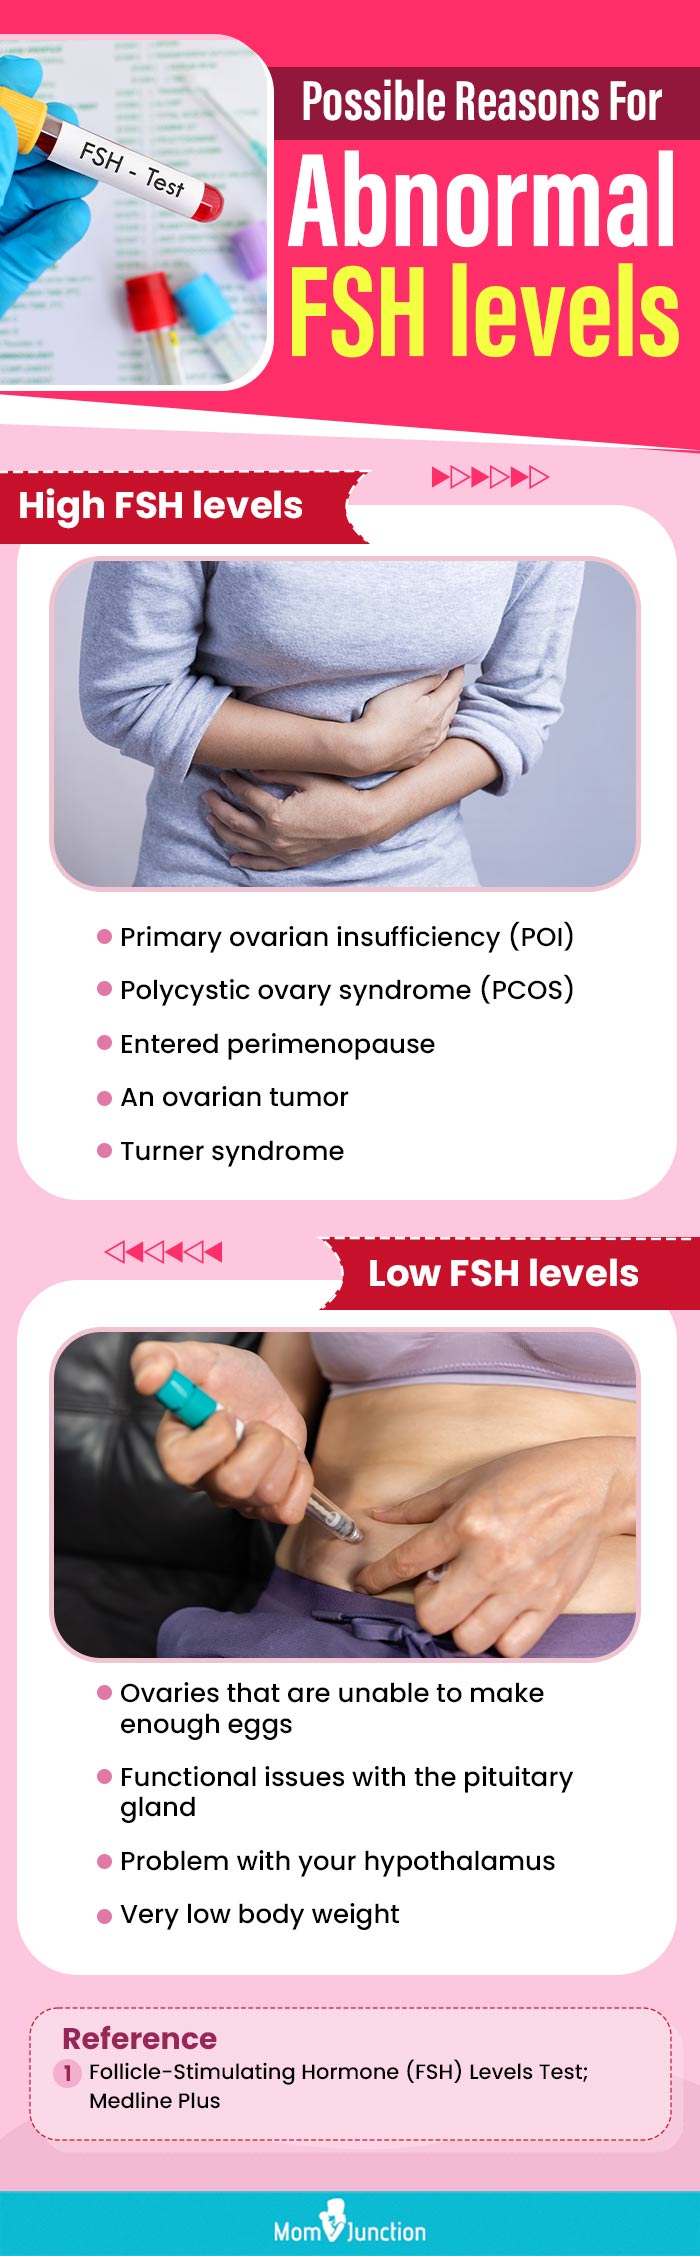  possible reasons for abnormal fsh levels(infographic)